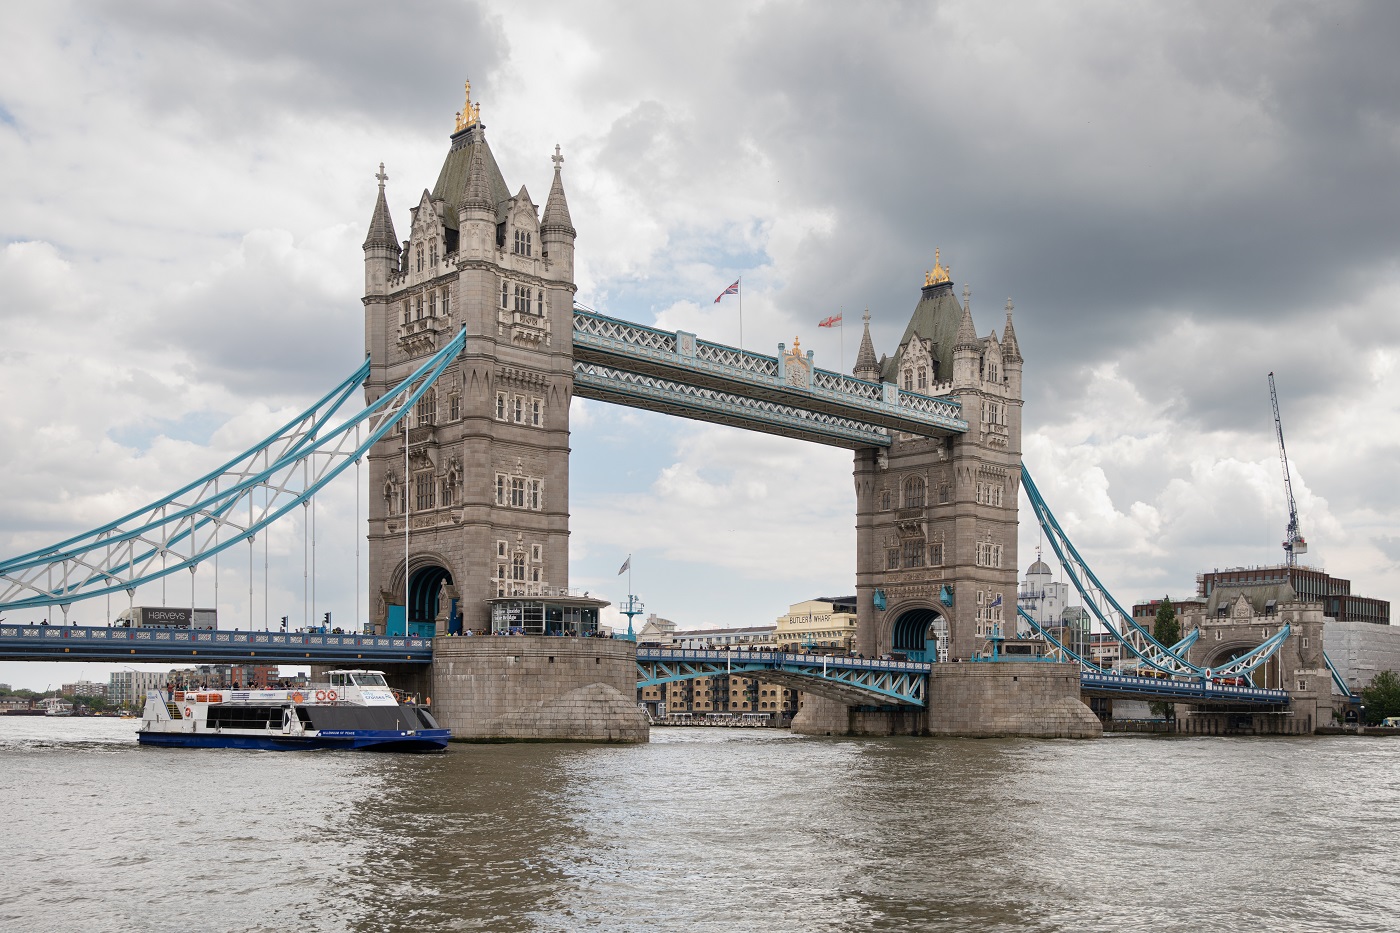 A photo of Tower Bridge in London.